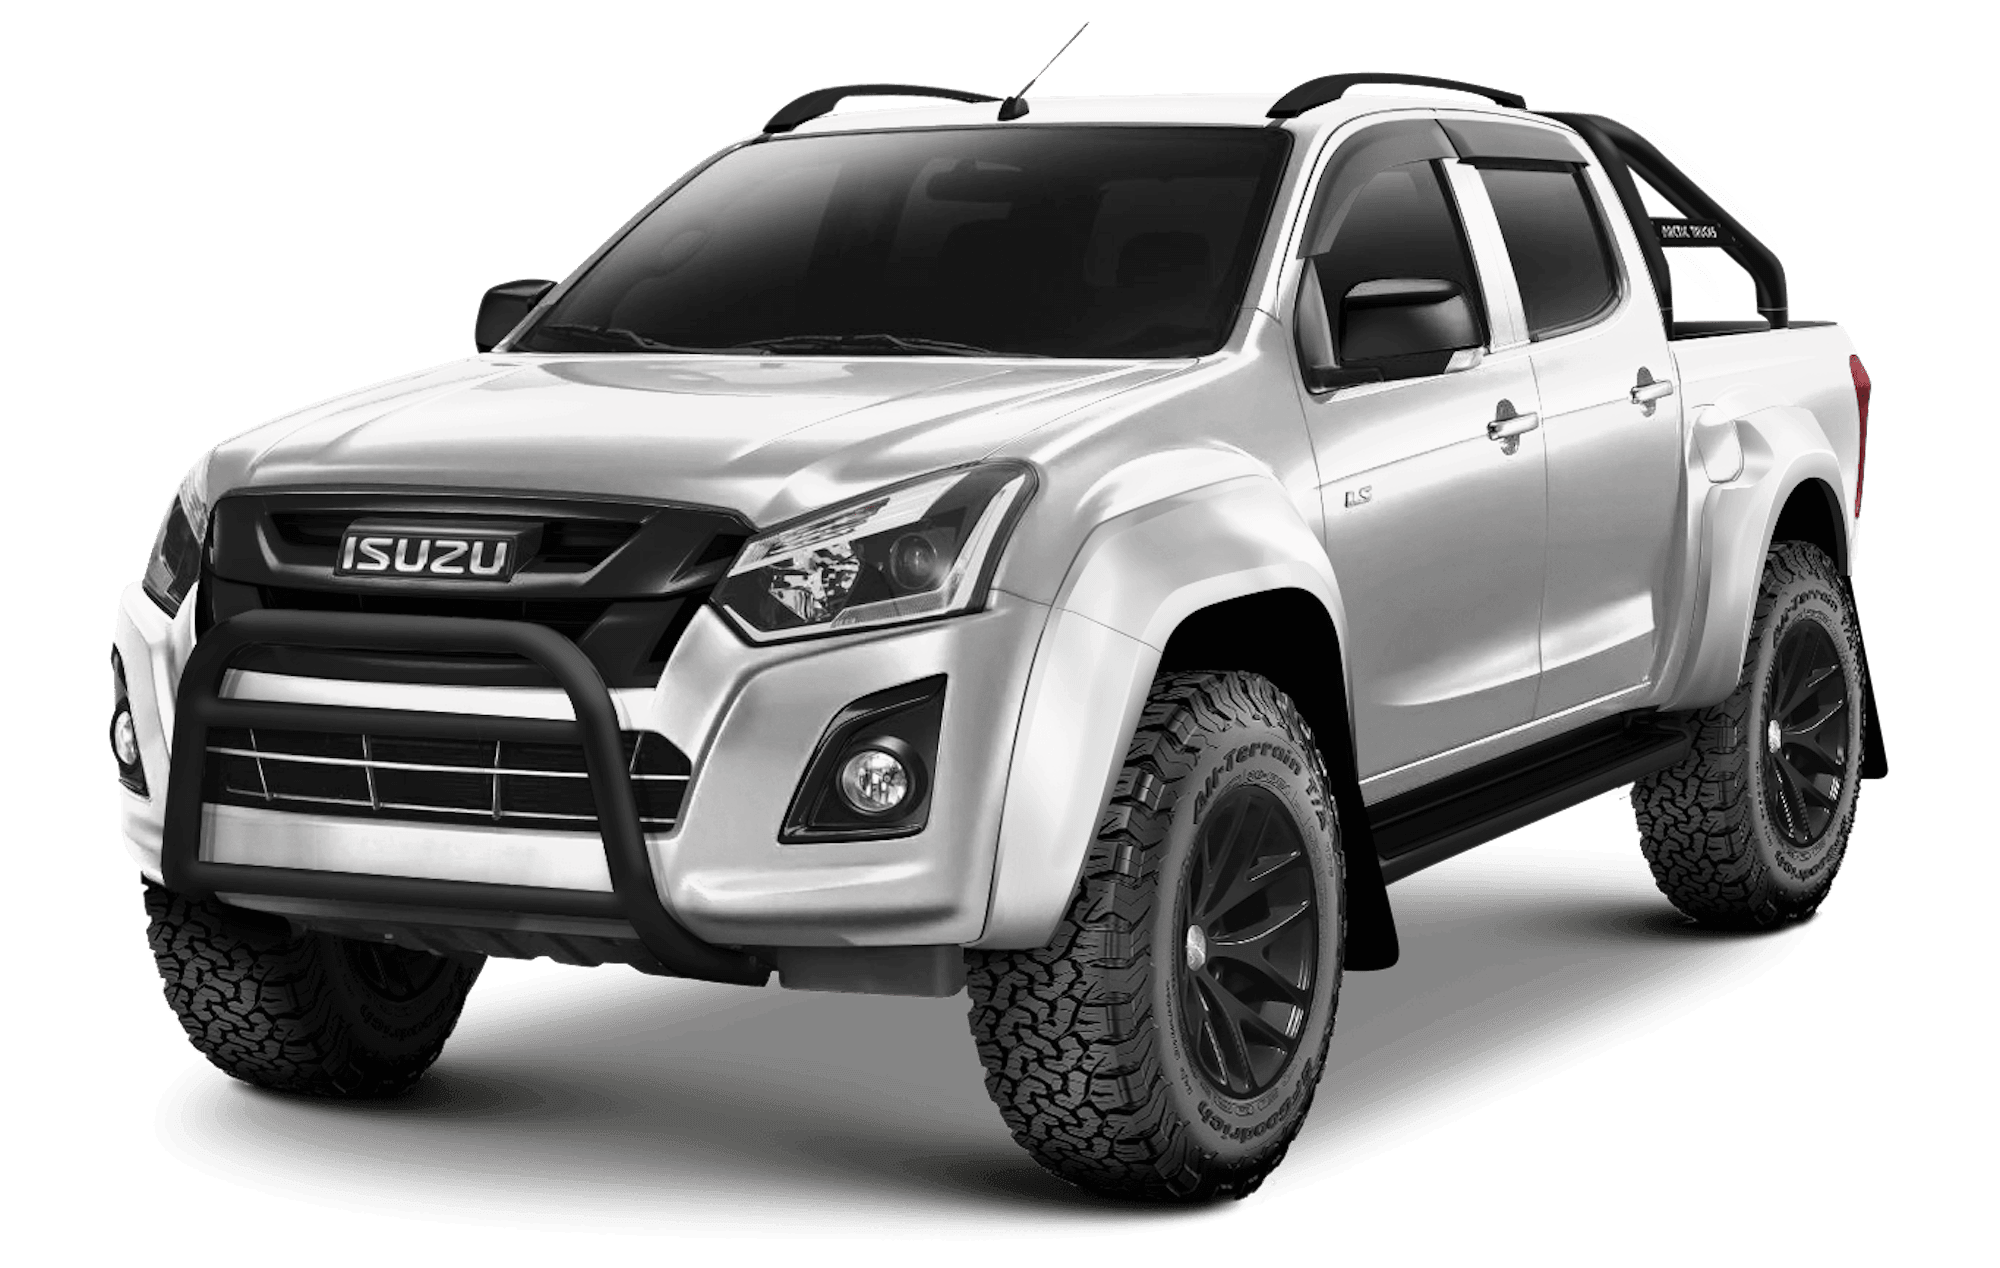 Find your best Isuzu finance rate with Driva